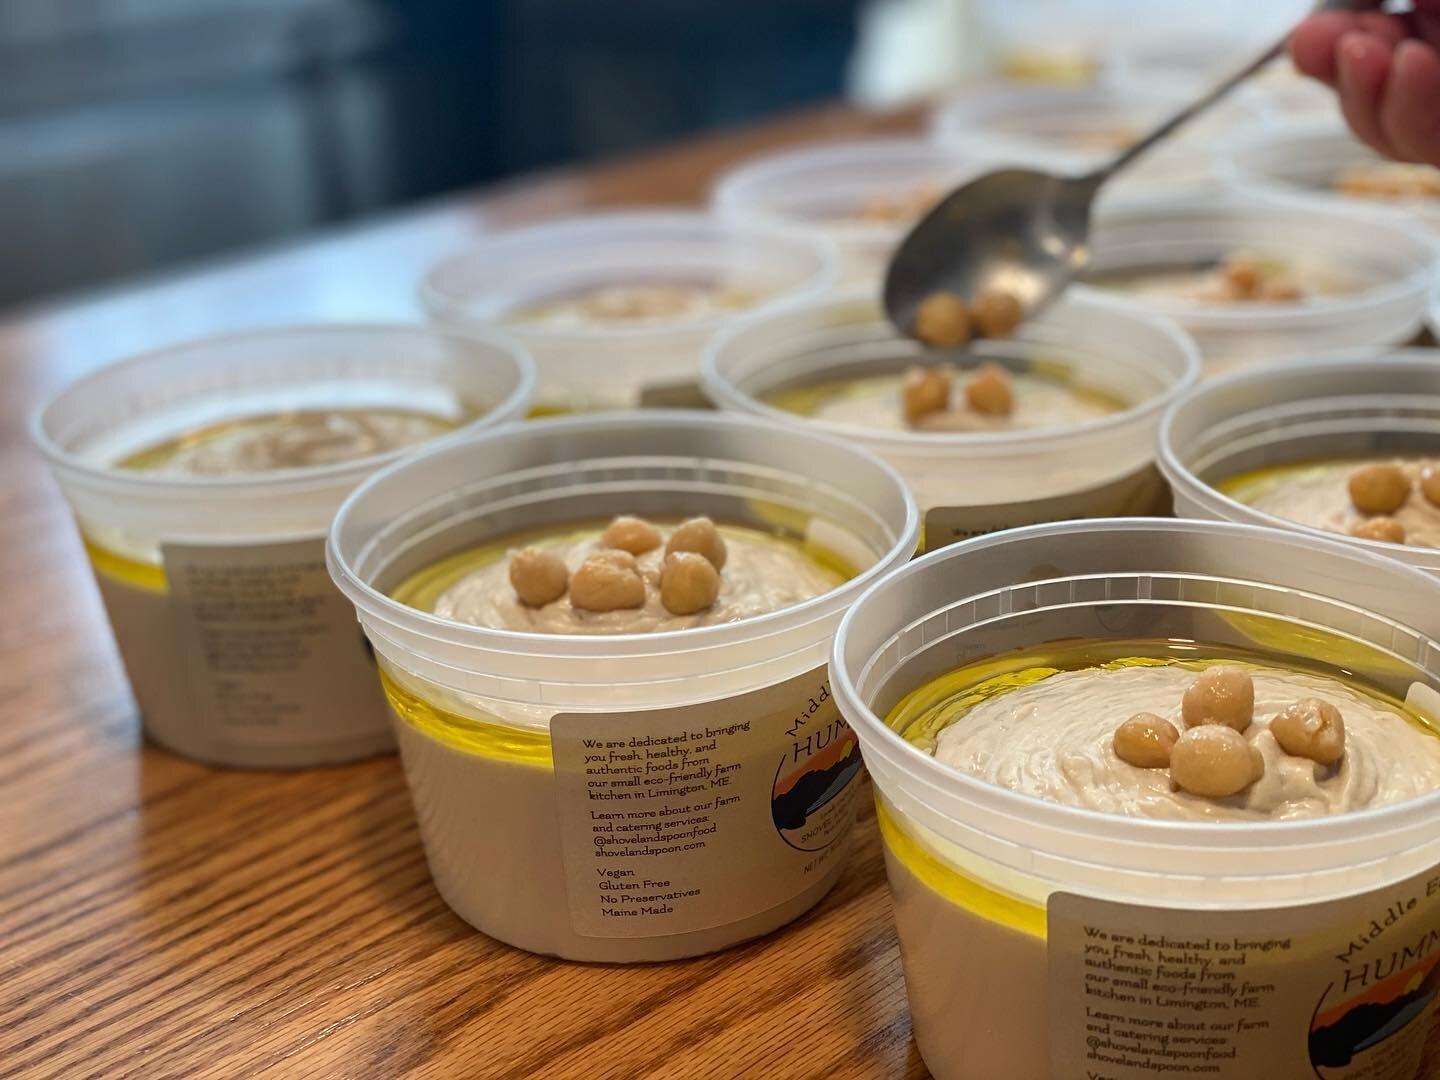 Each tub is hand-garnished with extra virgin olive oil, organic chickpeas, paprika and ❤️. Fresh batch of Middle East Coast Hummus and Tahini Dip out for delivery!